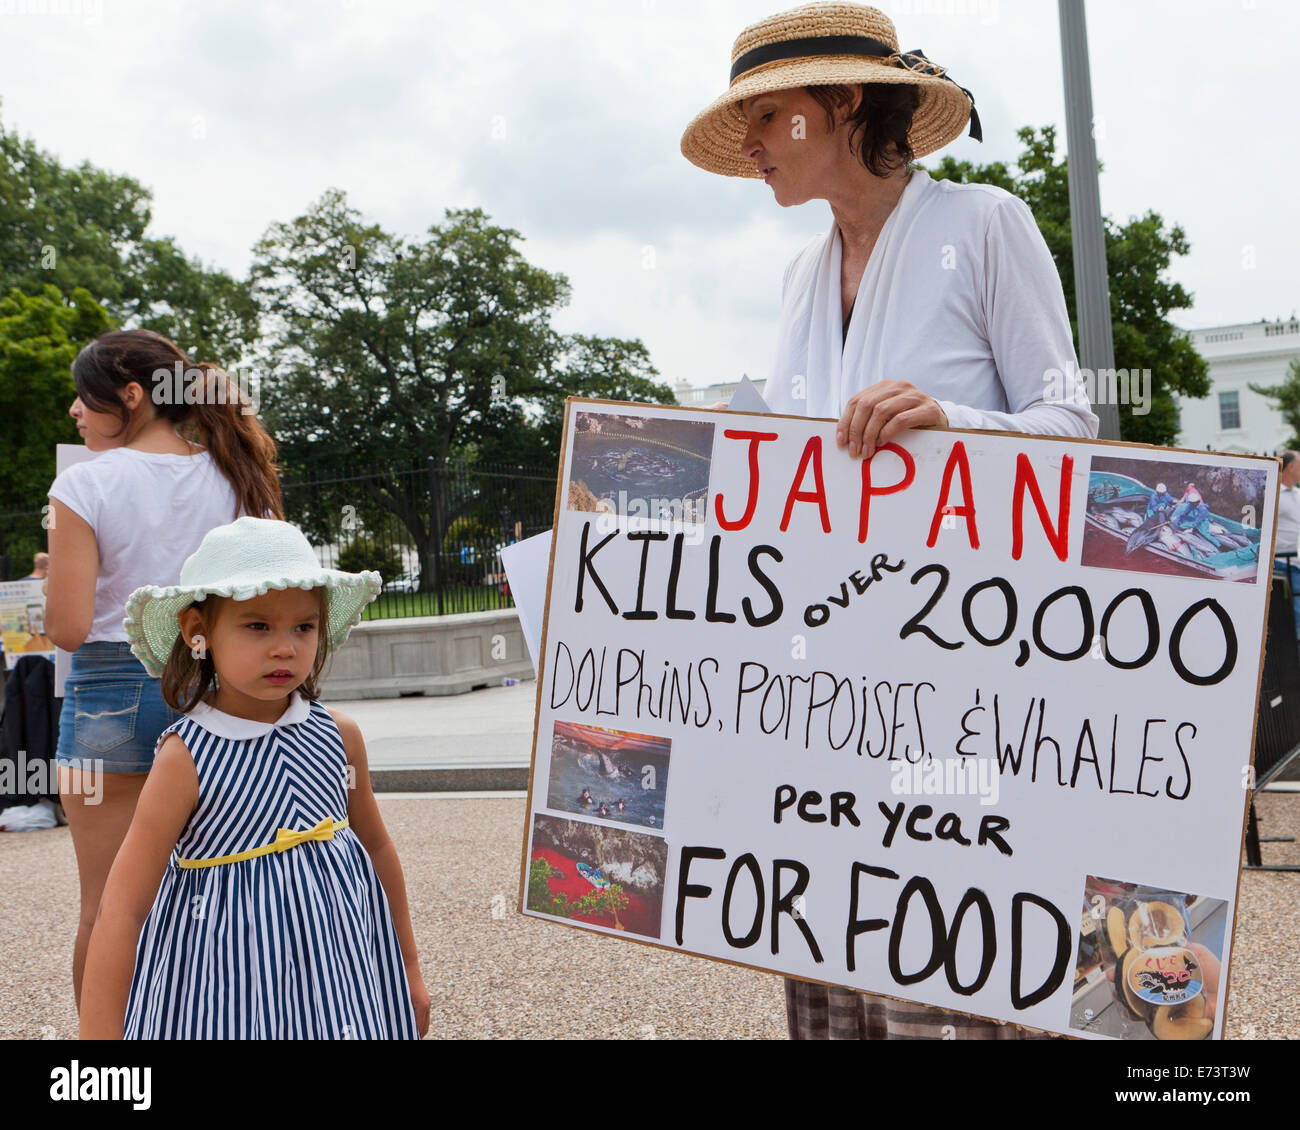 PETA members protesting in front of the White House against Japanese dolphin fishing - Washington, DC USA Stock Photo